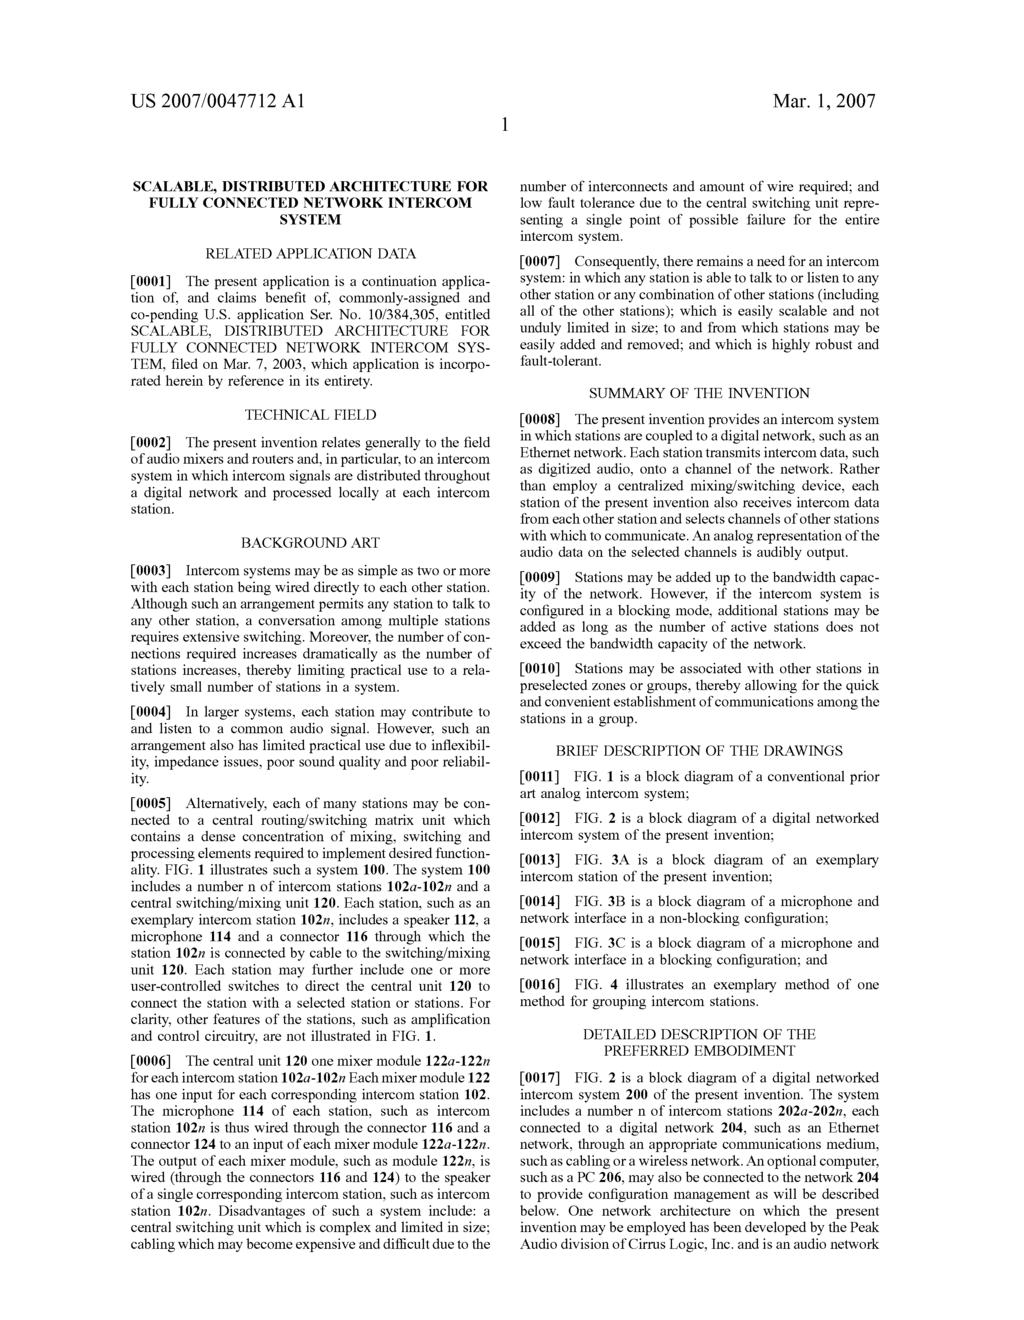 US 2007/0047712 A1 Mar. 1, 2007 SCALABLE, DISTRIBUTED ARCHITECTURE FOR FULLY CONNECTED NETWORK INTERCOM SYSTEM RELATED APPLICATION DATA 0001.